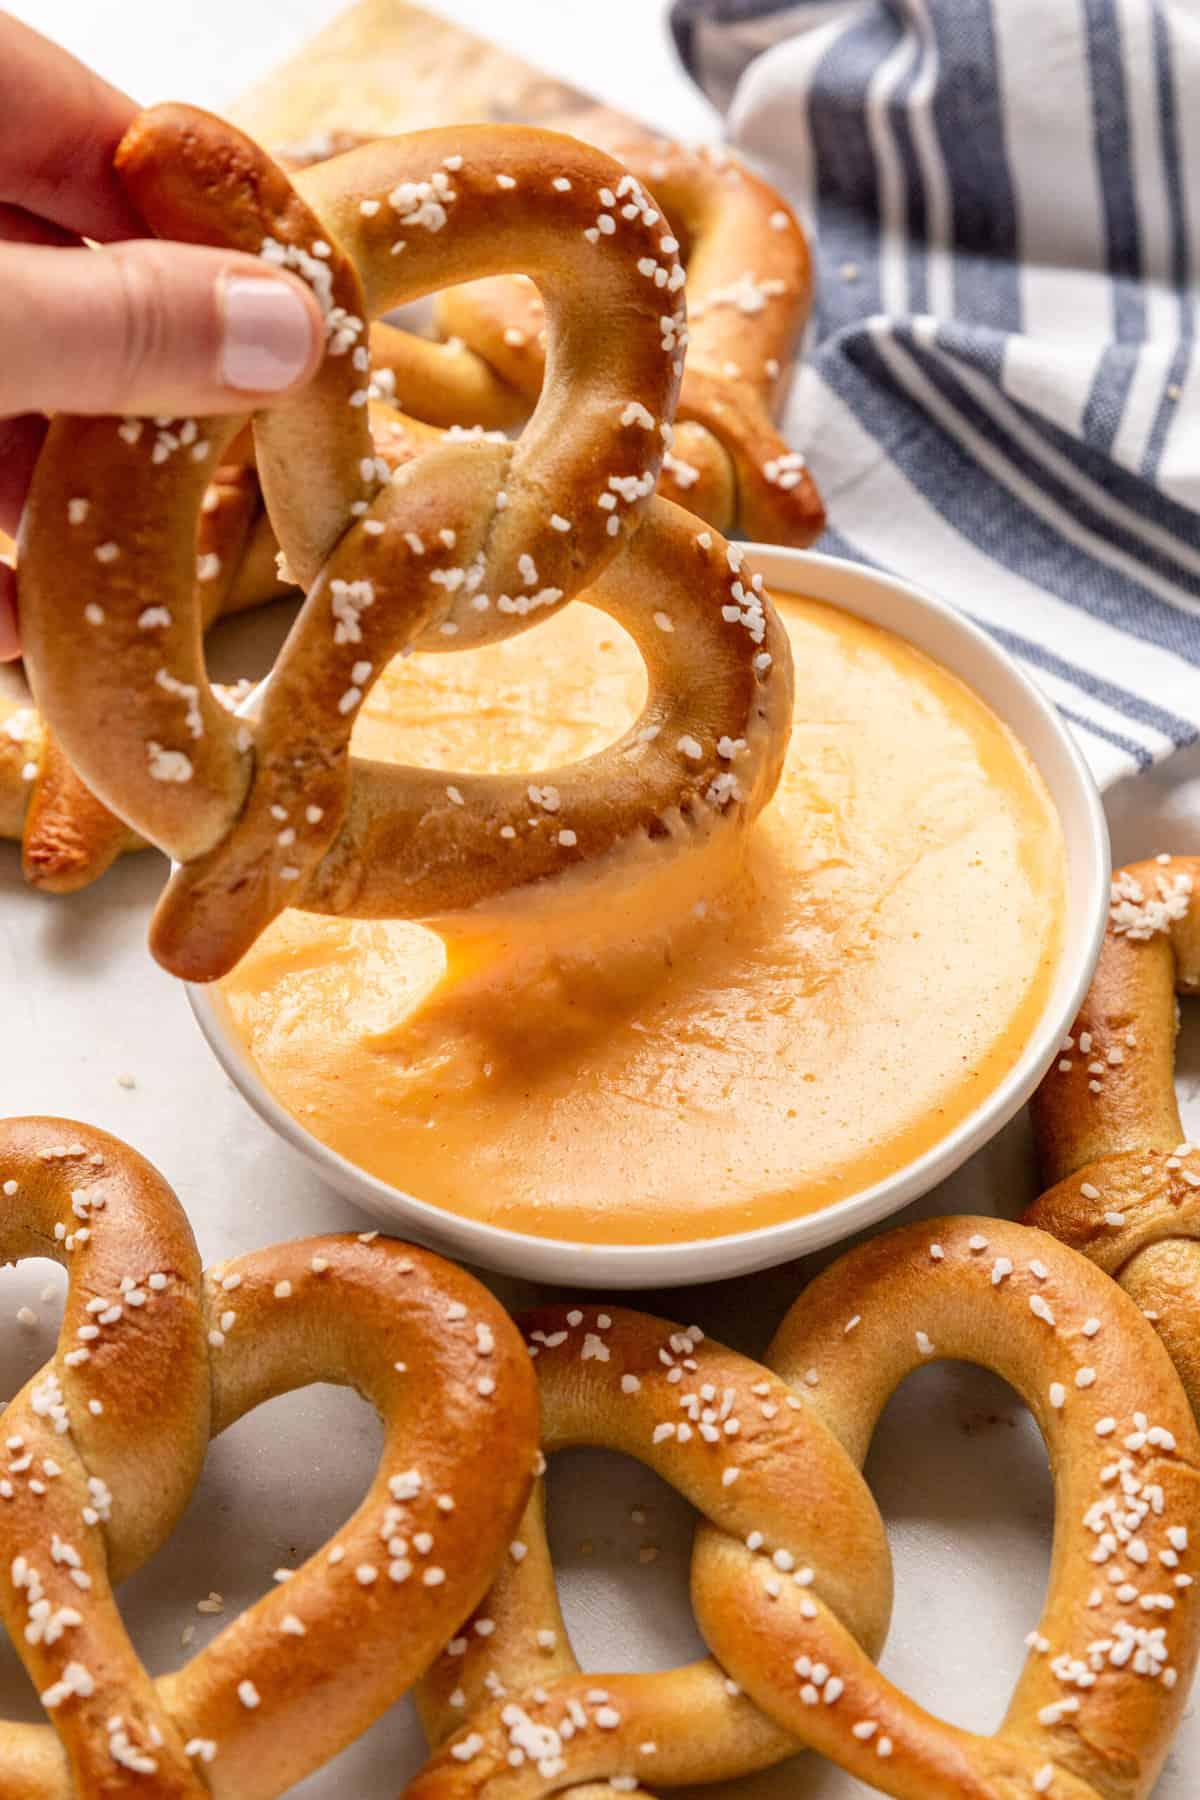 salted pretzel dipping into homemade cheese dip.